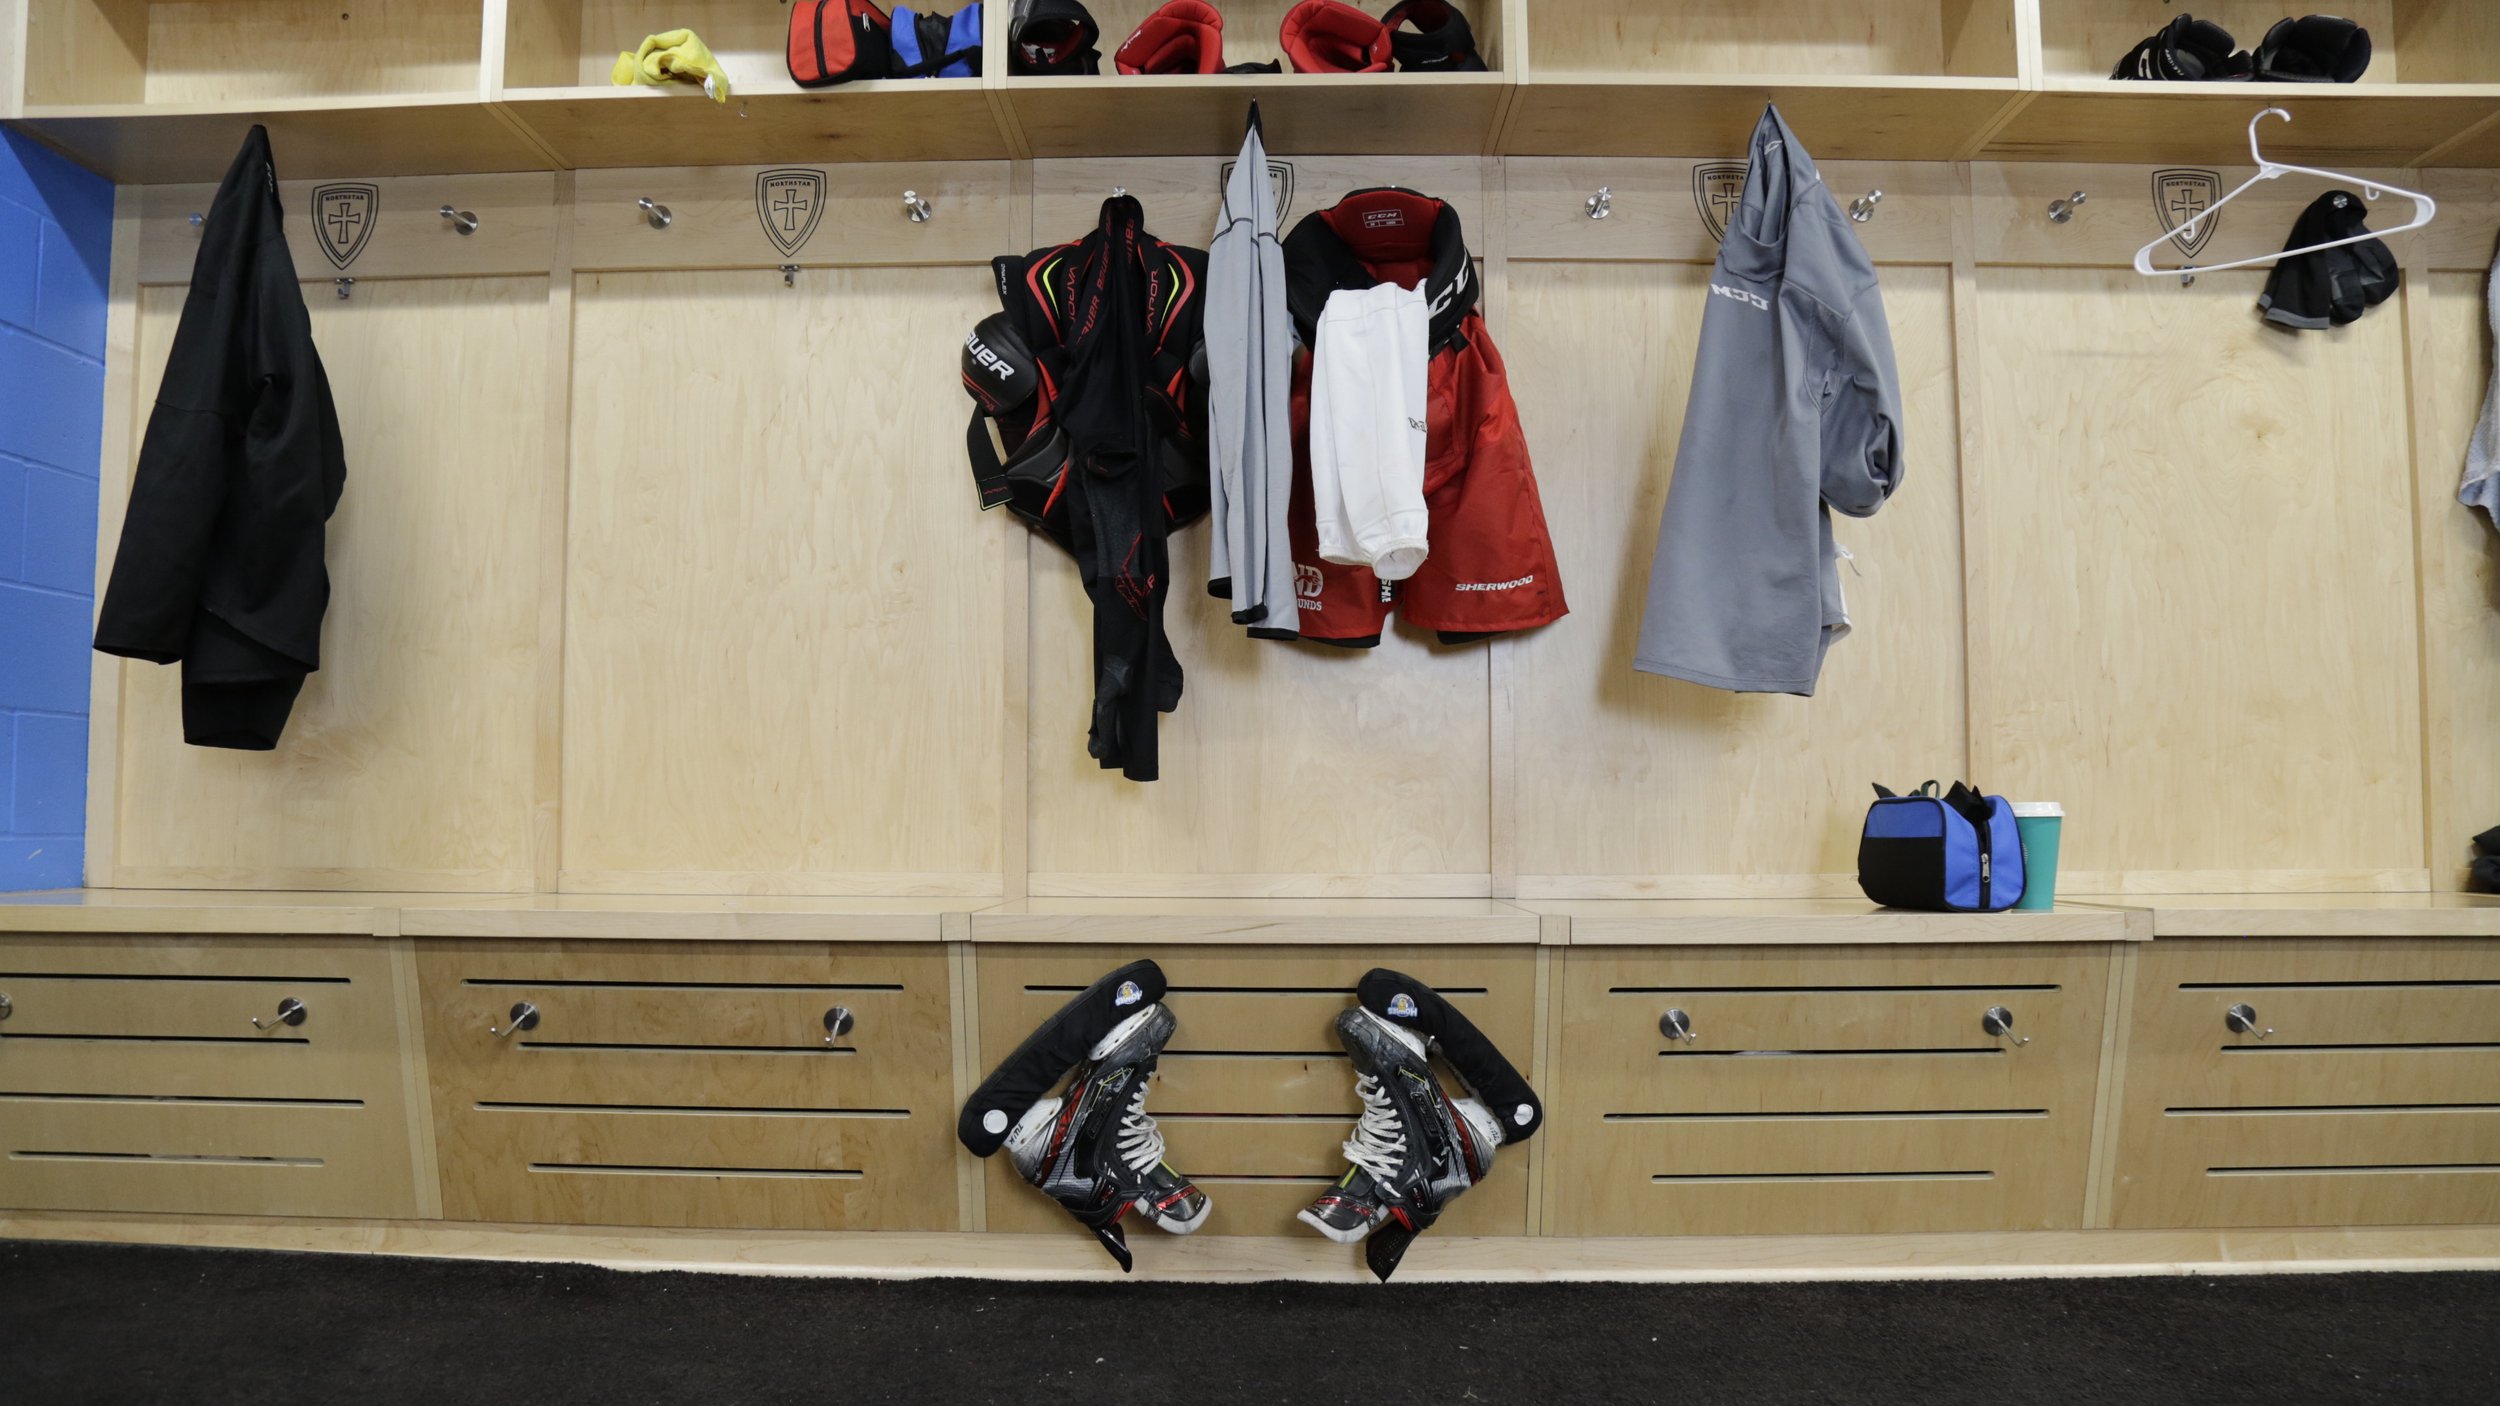  Each individual area in the customized sports center features a top shelf, two metal hooks for handing clothes or uniforms, and a lower bottom area complete with metal hooks for hanging skates.  